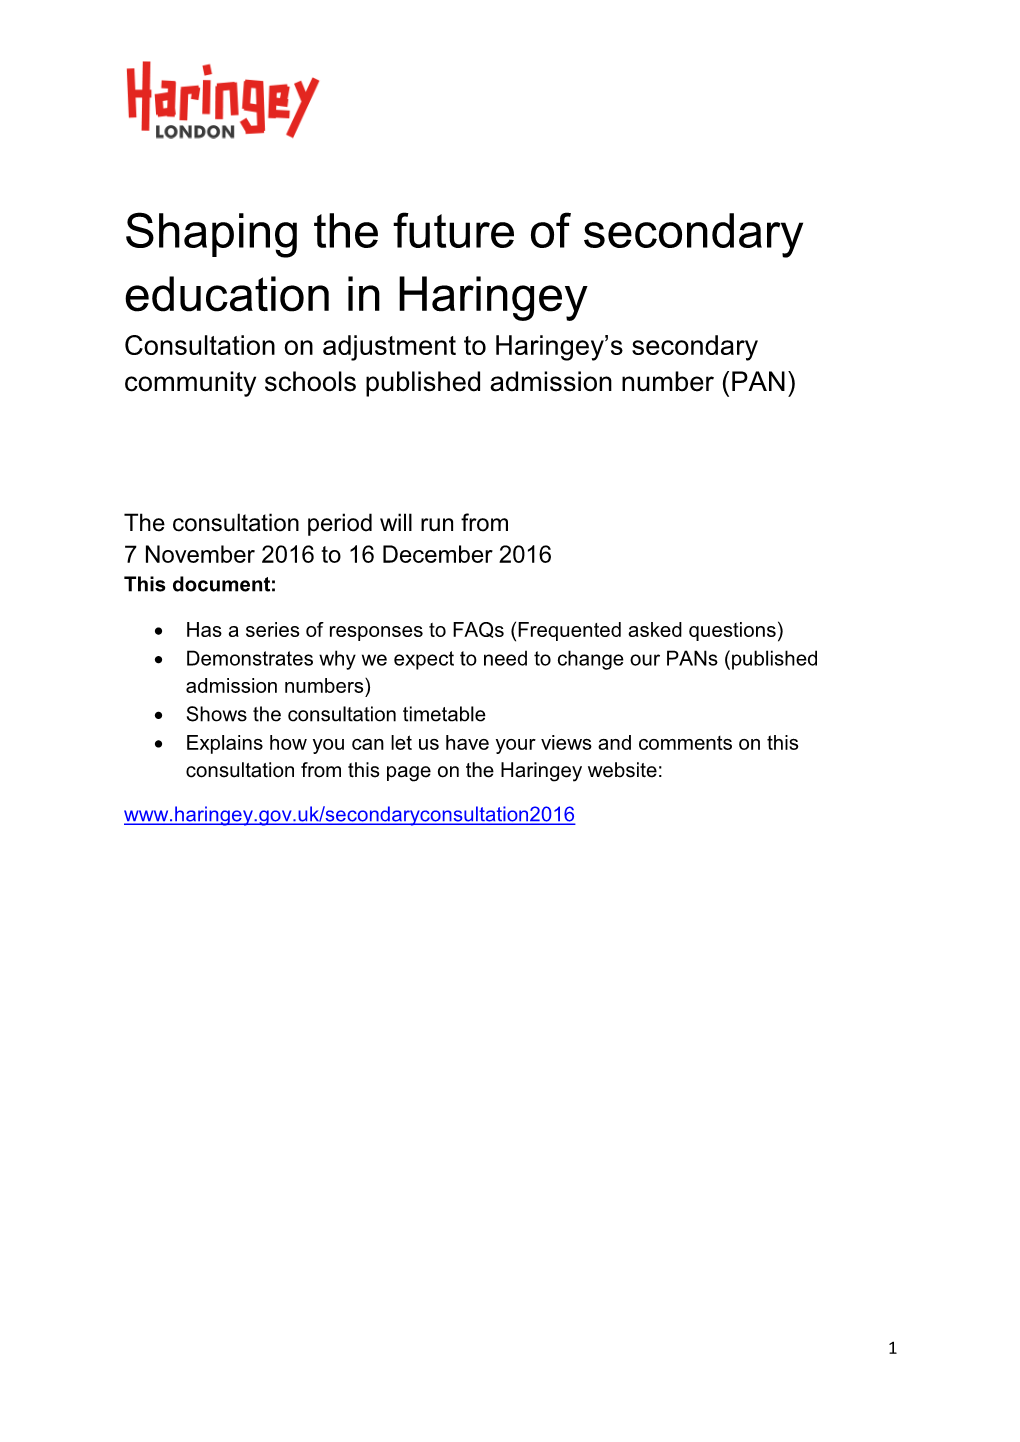 Shaping the Future of Secondary Education in Haringey Consultation on Adjustment to Haringey’S Secondary Community Schools Published Admission Number (PAN)